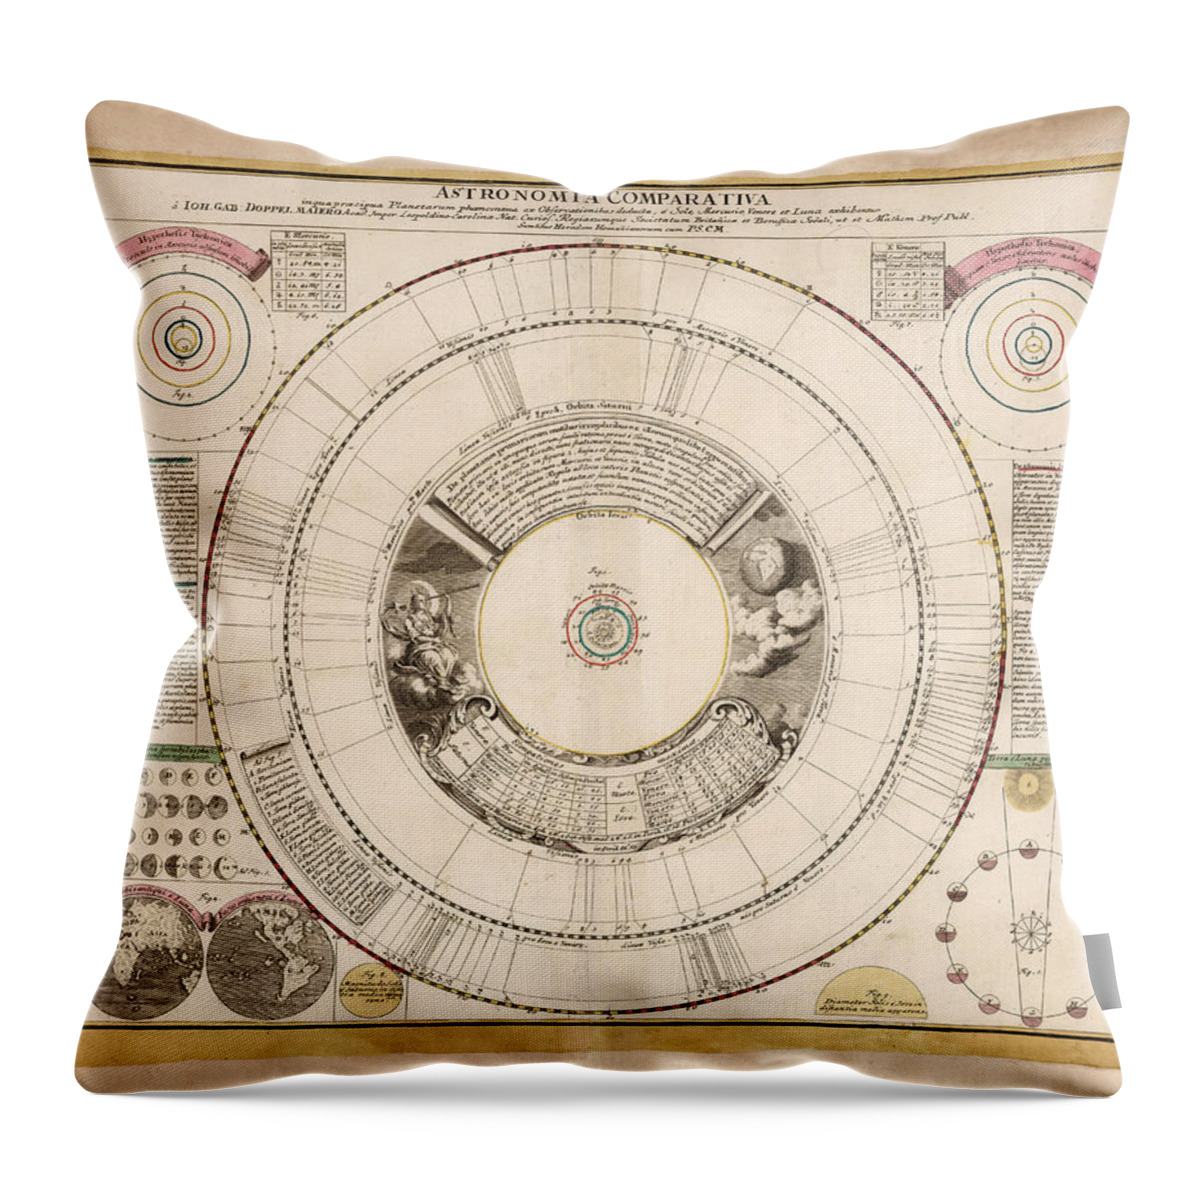 Astronomica Comparative Throw Pillow featuring the drawing Astronomia Comparativa - Comparative Chart of the Planets - Celestial Chart - Astronomical Chart by Studio Grafiikka